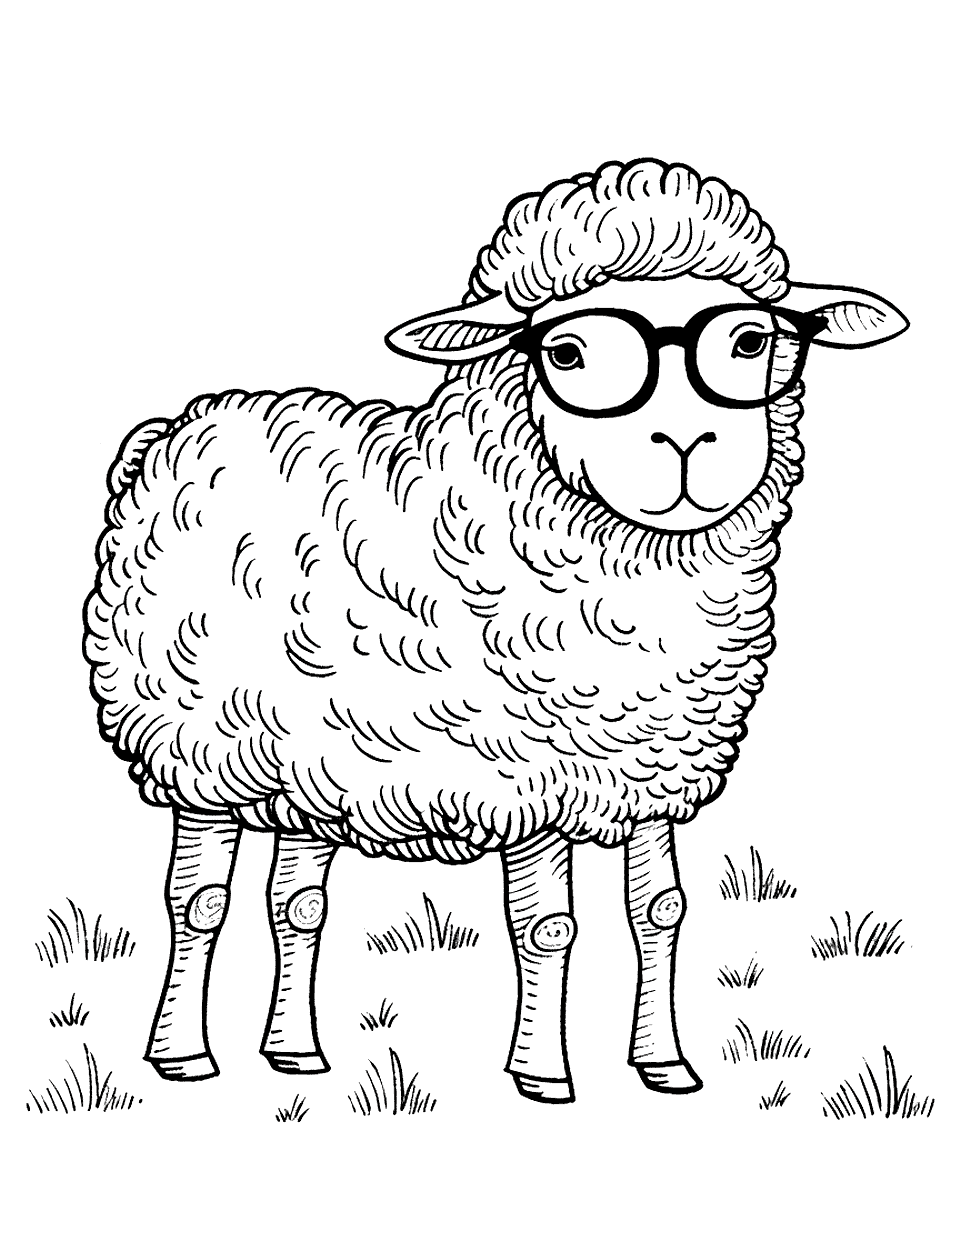 Sheep with Glasses Coloring Page - A cool sheep wearing oversized Glasses is standing in a meadow.